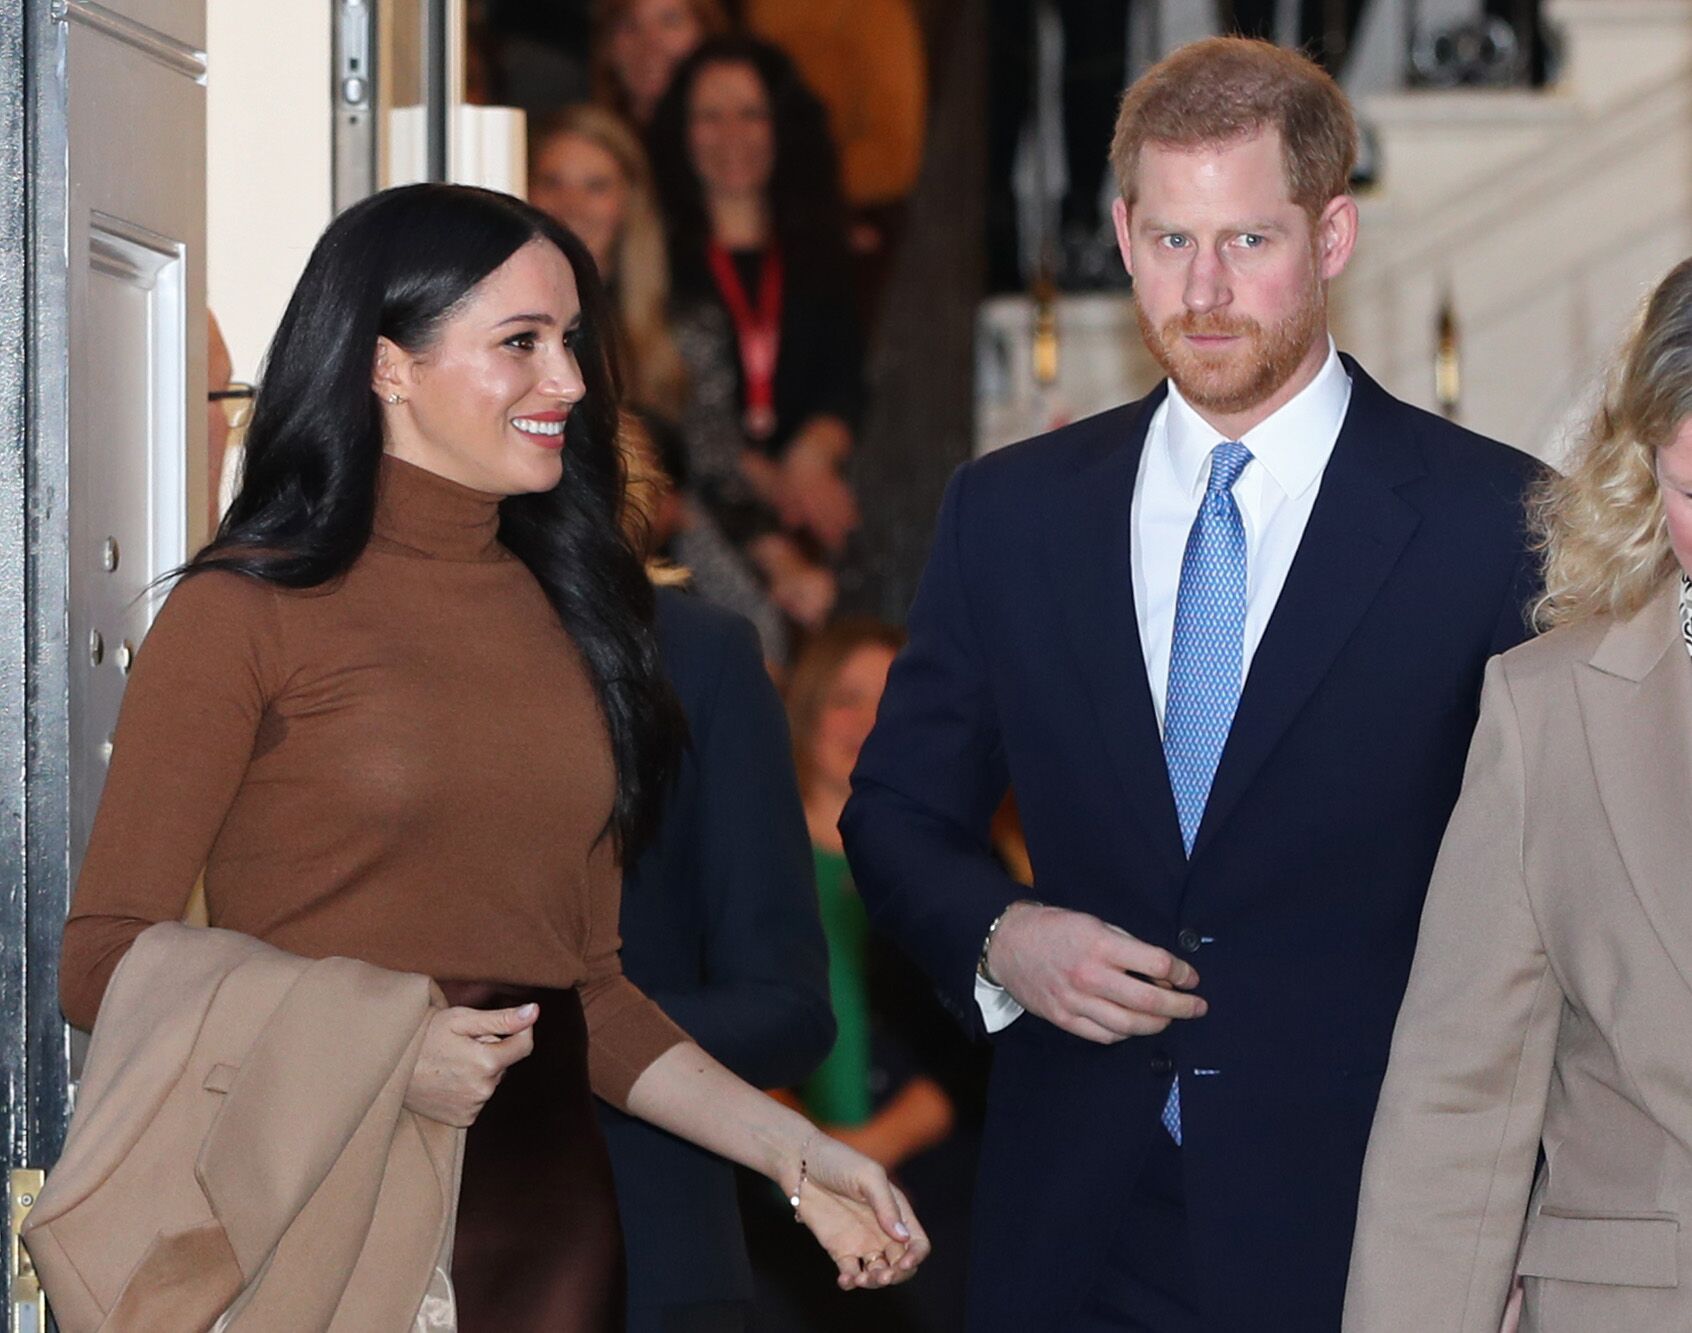 Duchess Meghan and Prince Harry visit Canada House, central London on January 7, 2020 | Photo: Yui Mok/Getty Images